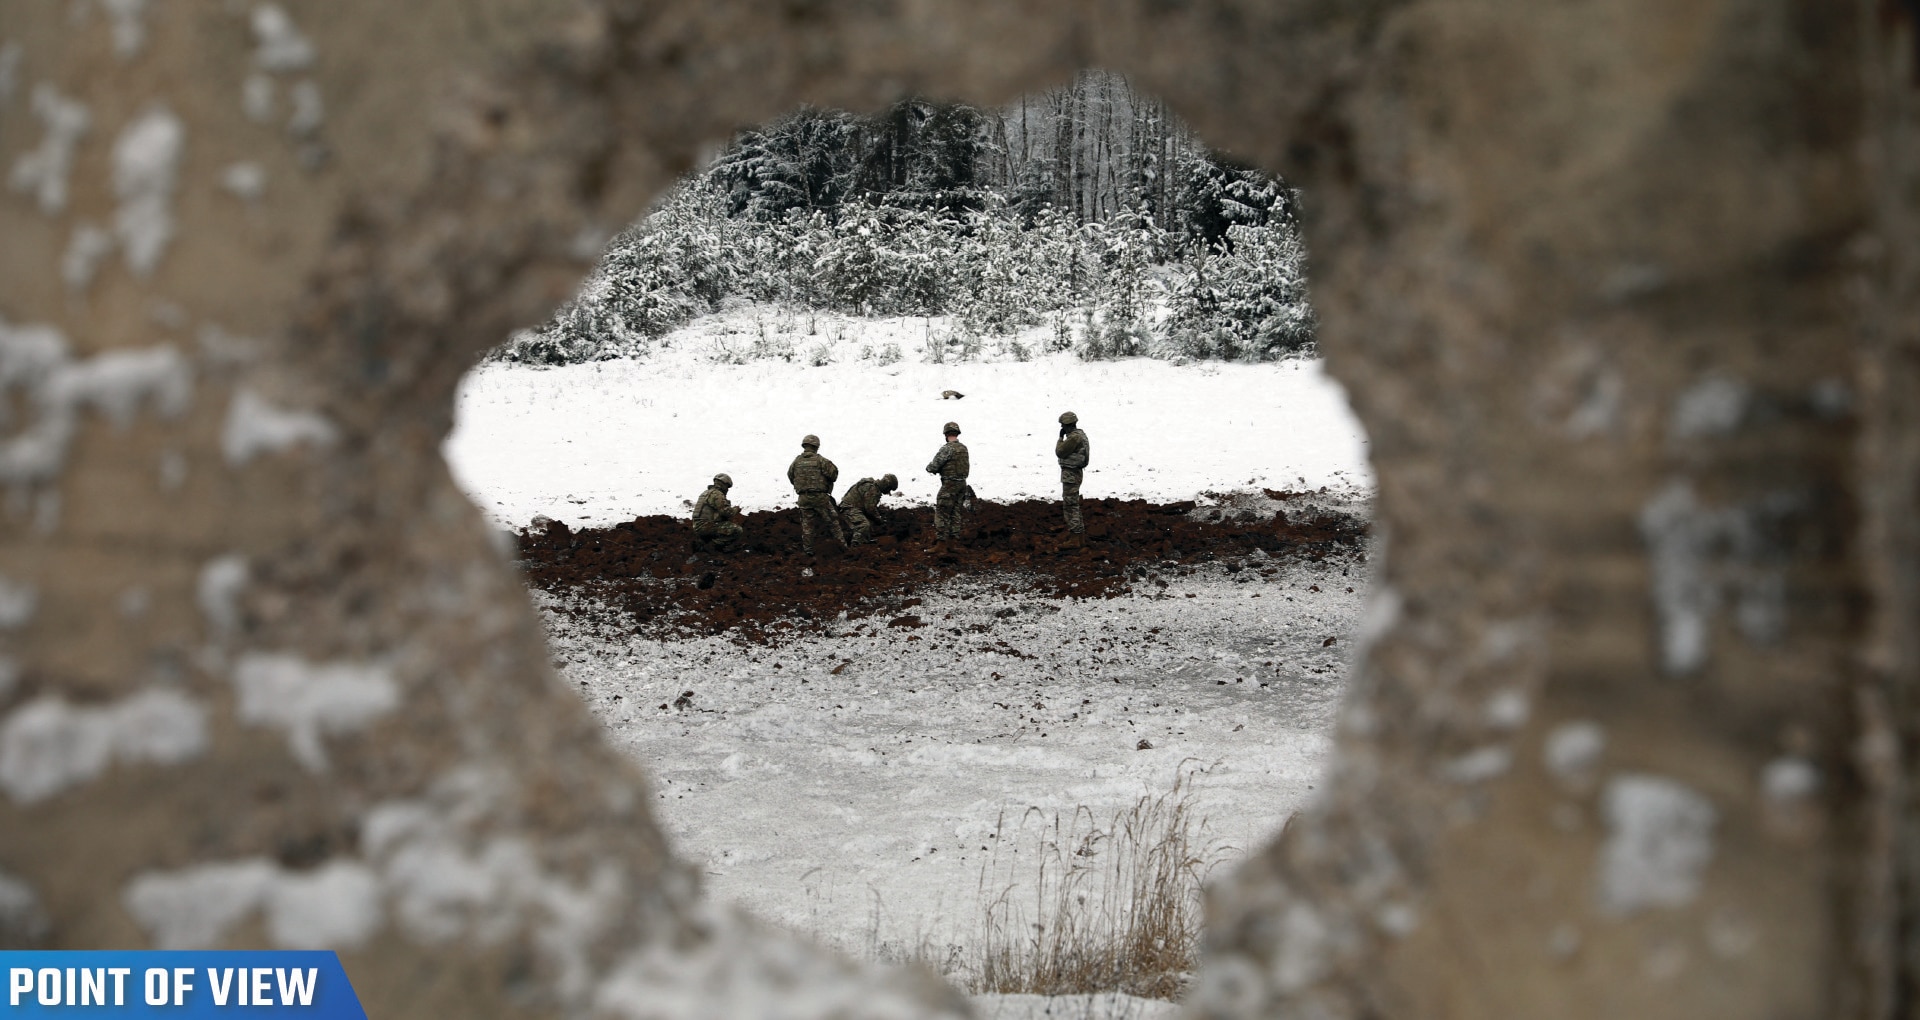 Soldiers seen through a hole in a cement wall work in a field.